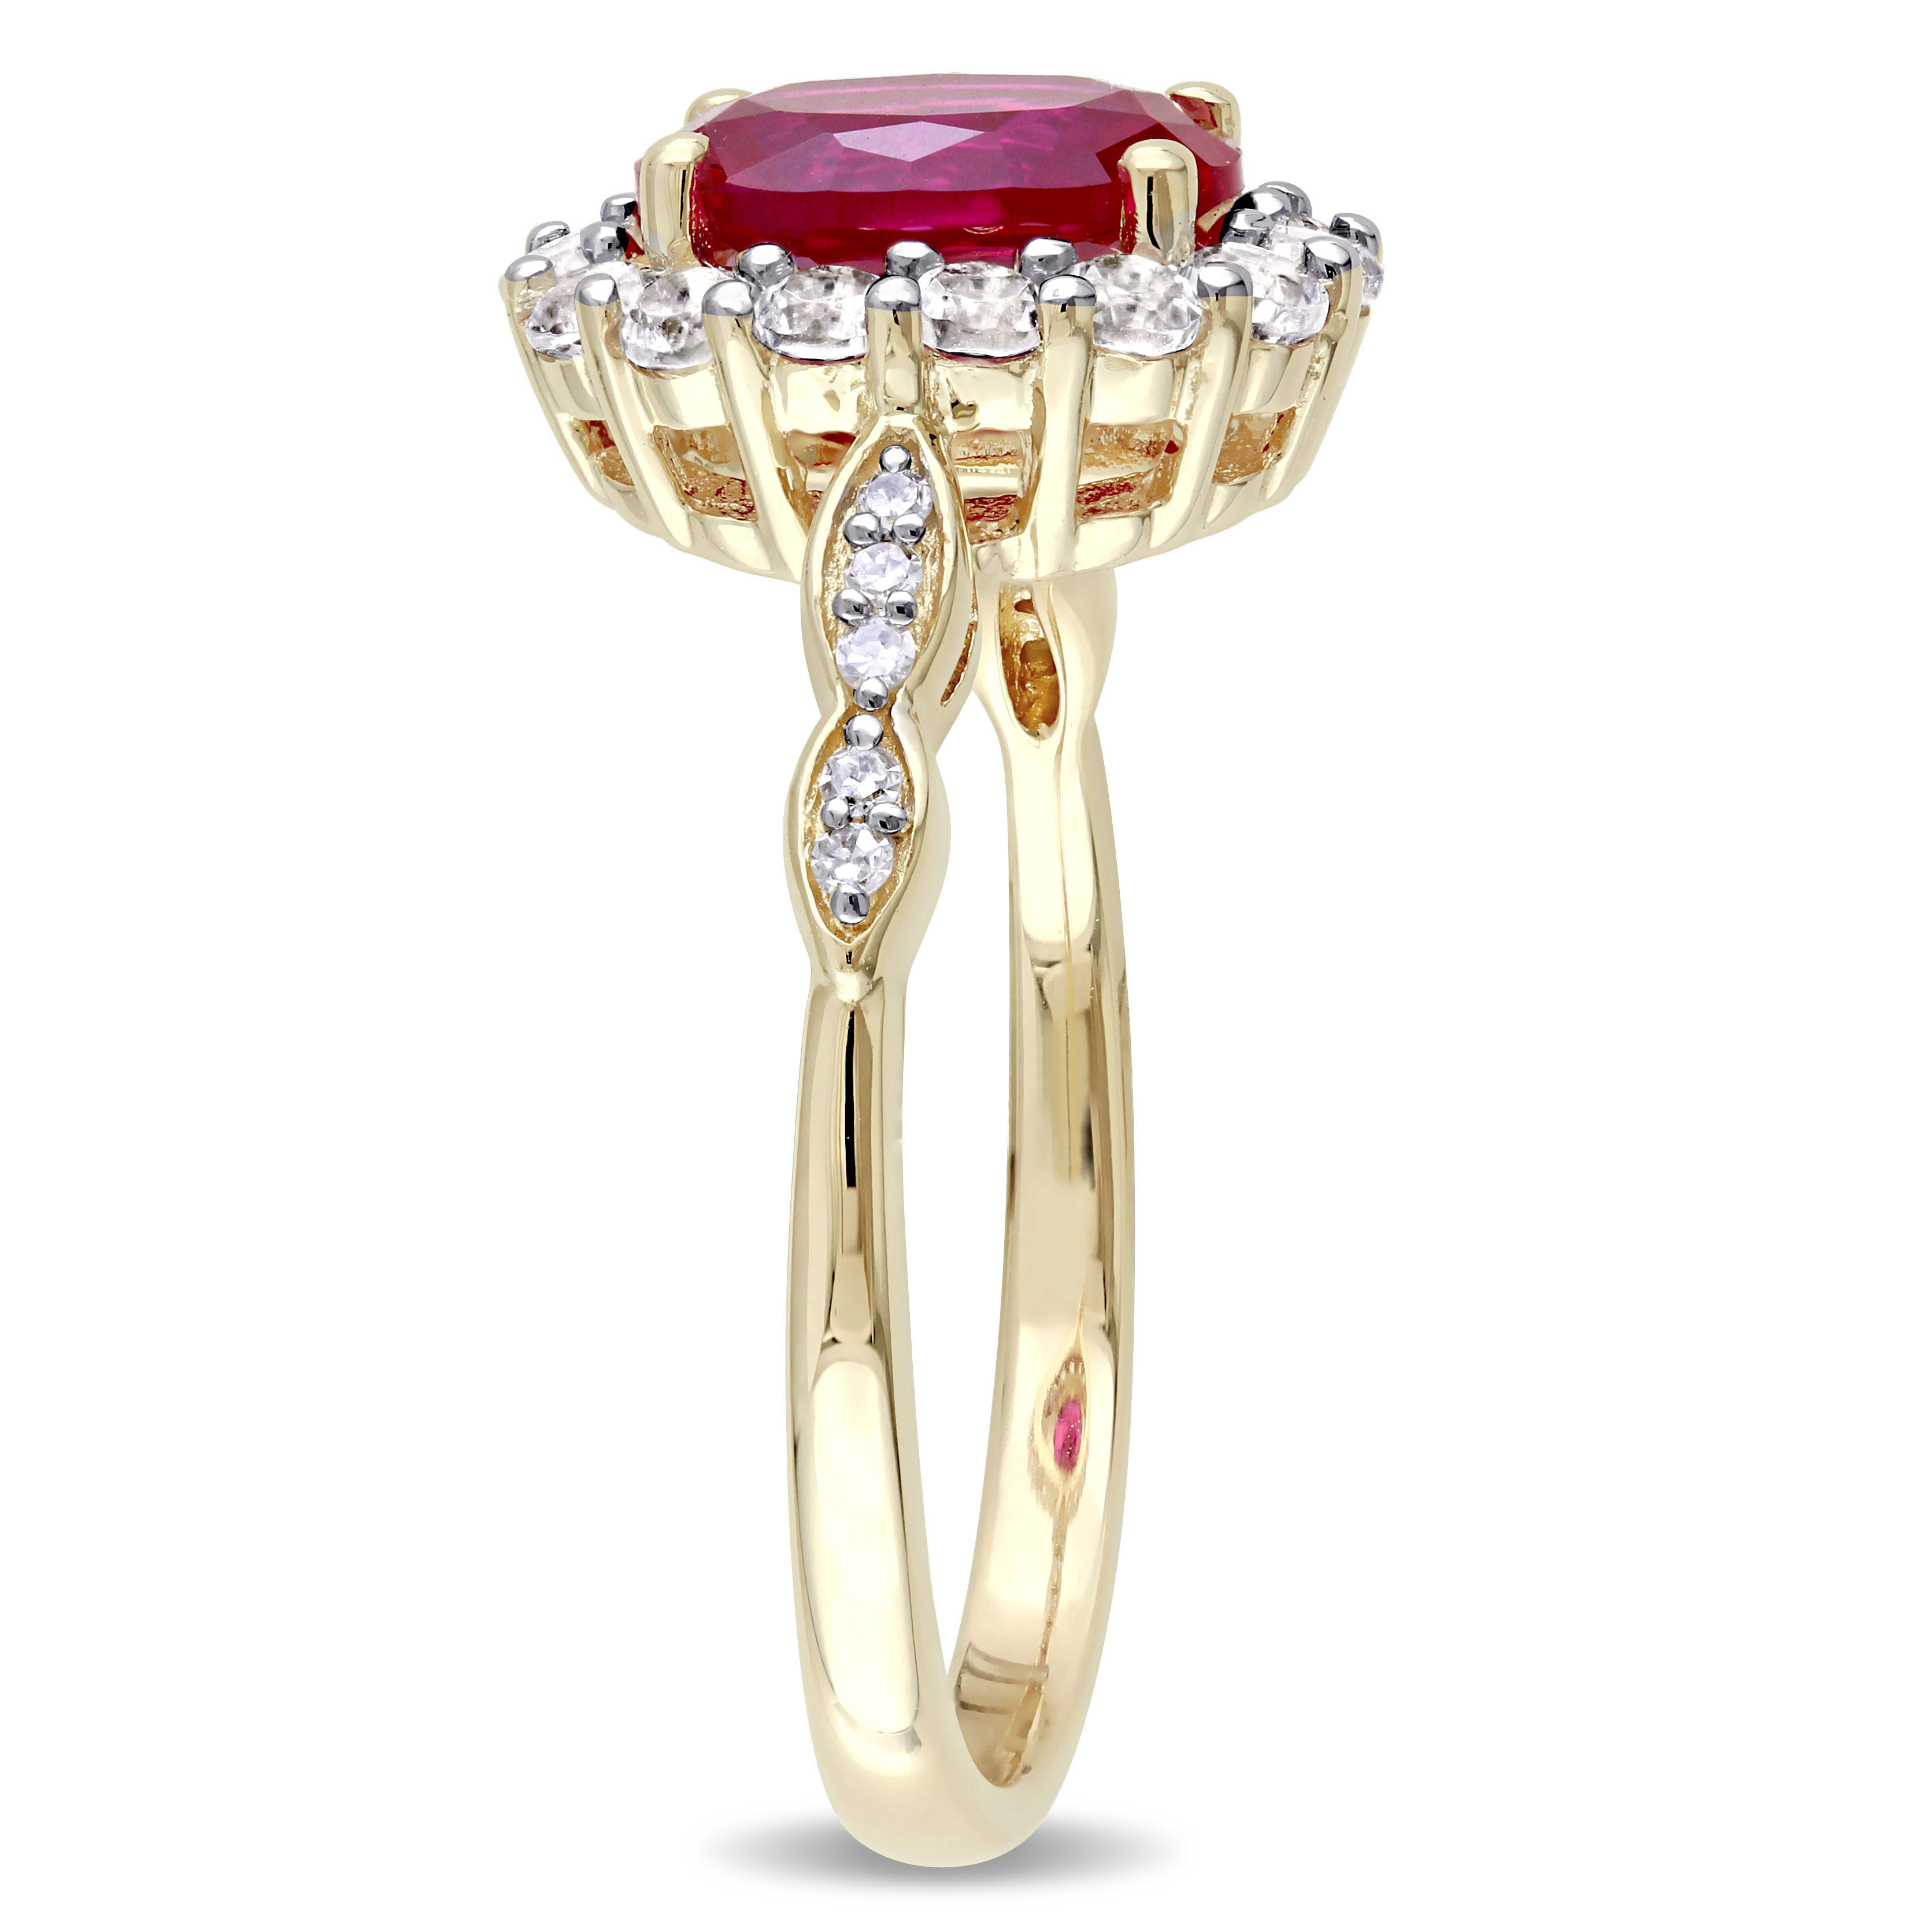 Oval Shape Created Ruby, White Topaz and Diamond Accent Vintage Ring in 14k Yellow Gold